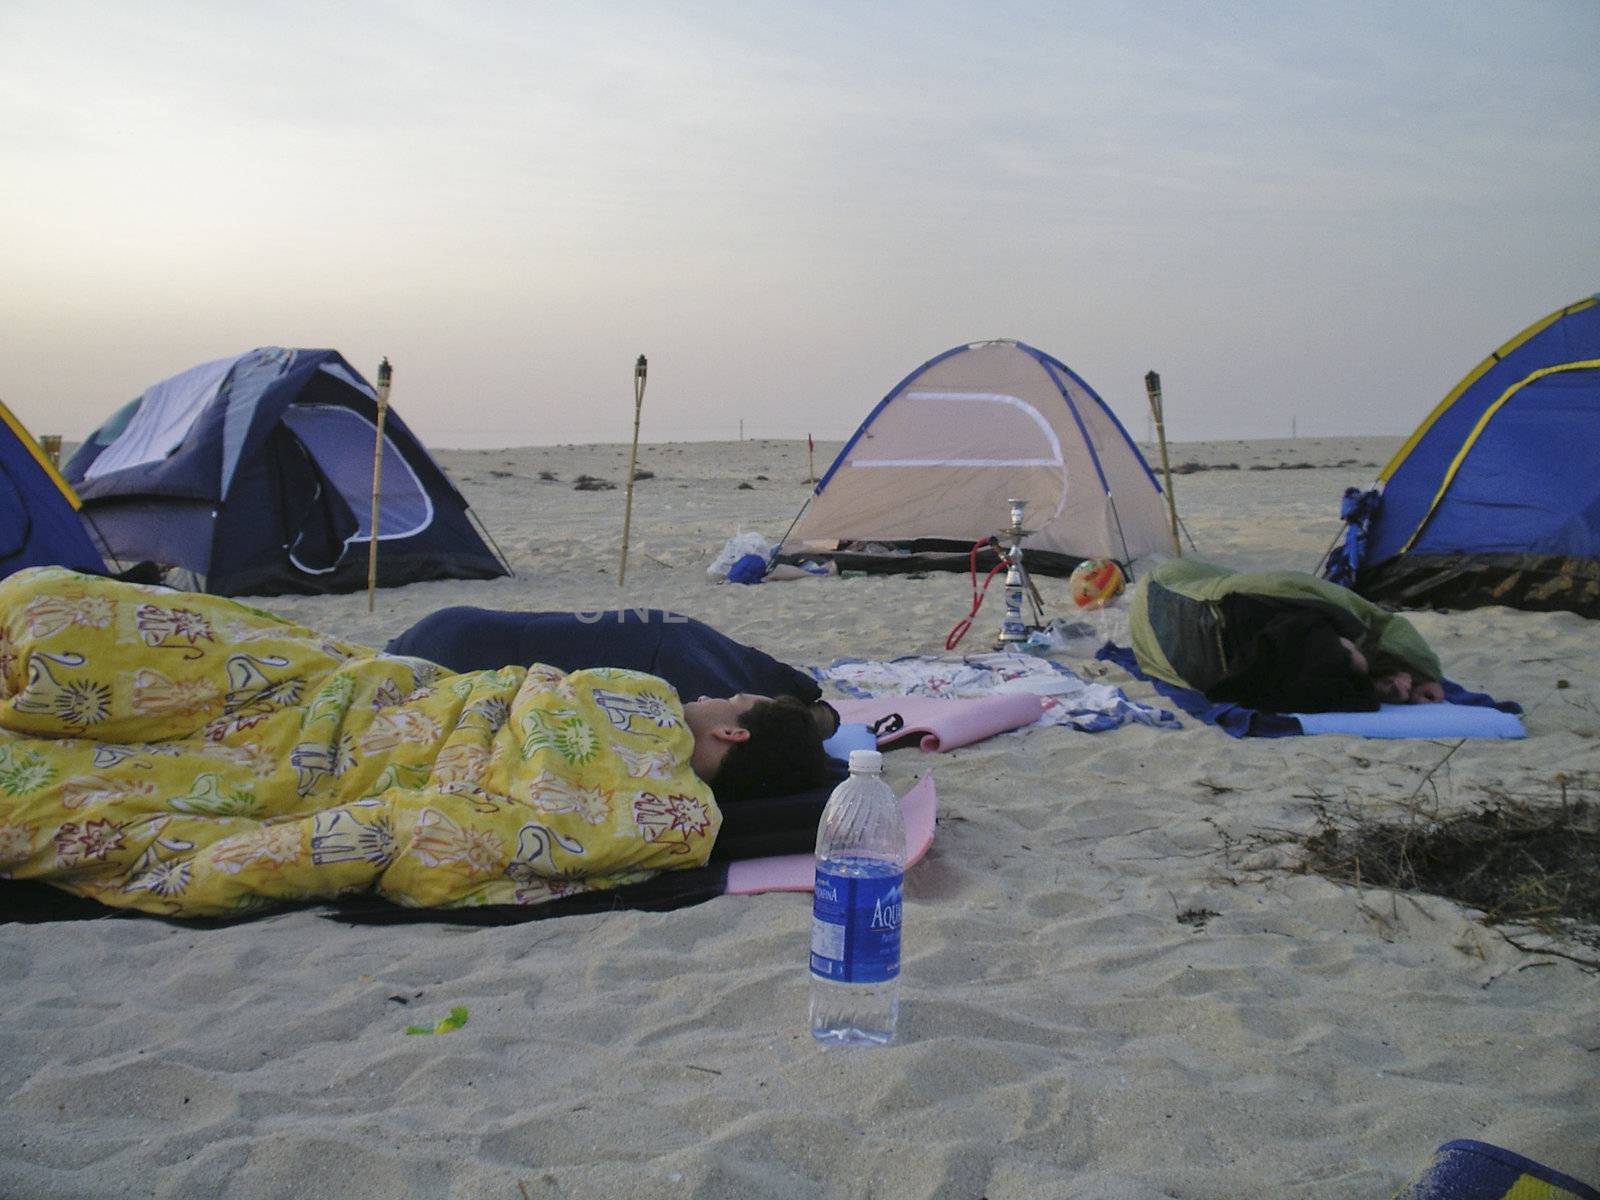 Camping on the beach for Eid in Dubai at Jebel Ali Free Zone 2 by cvail73